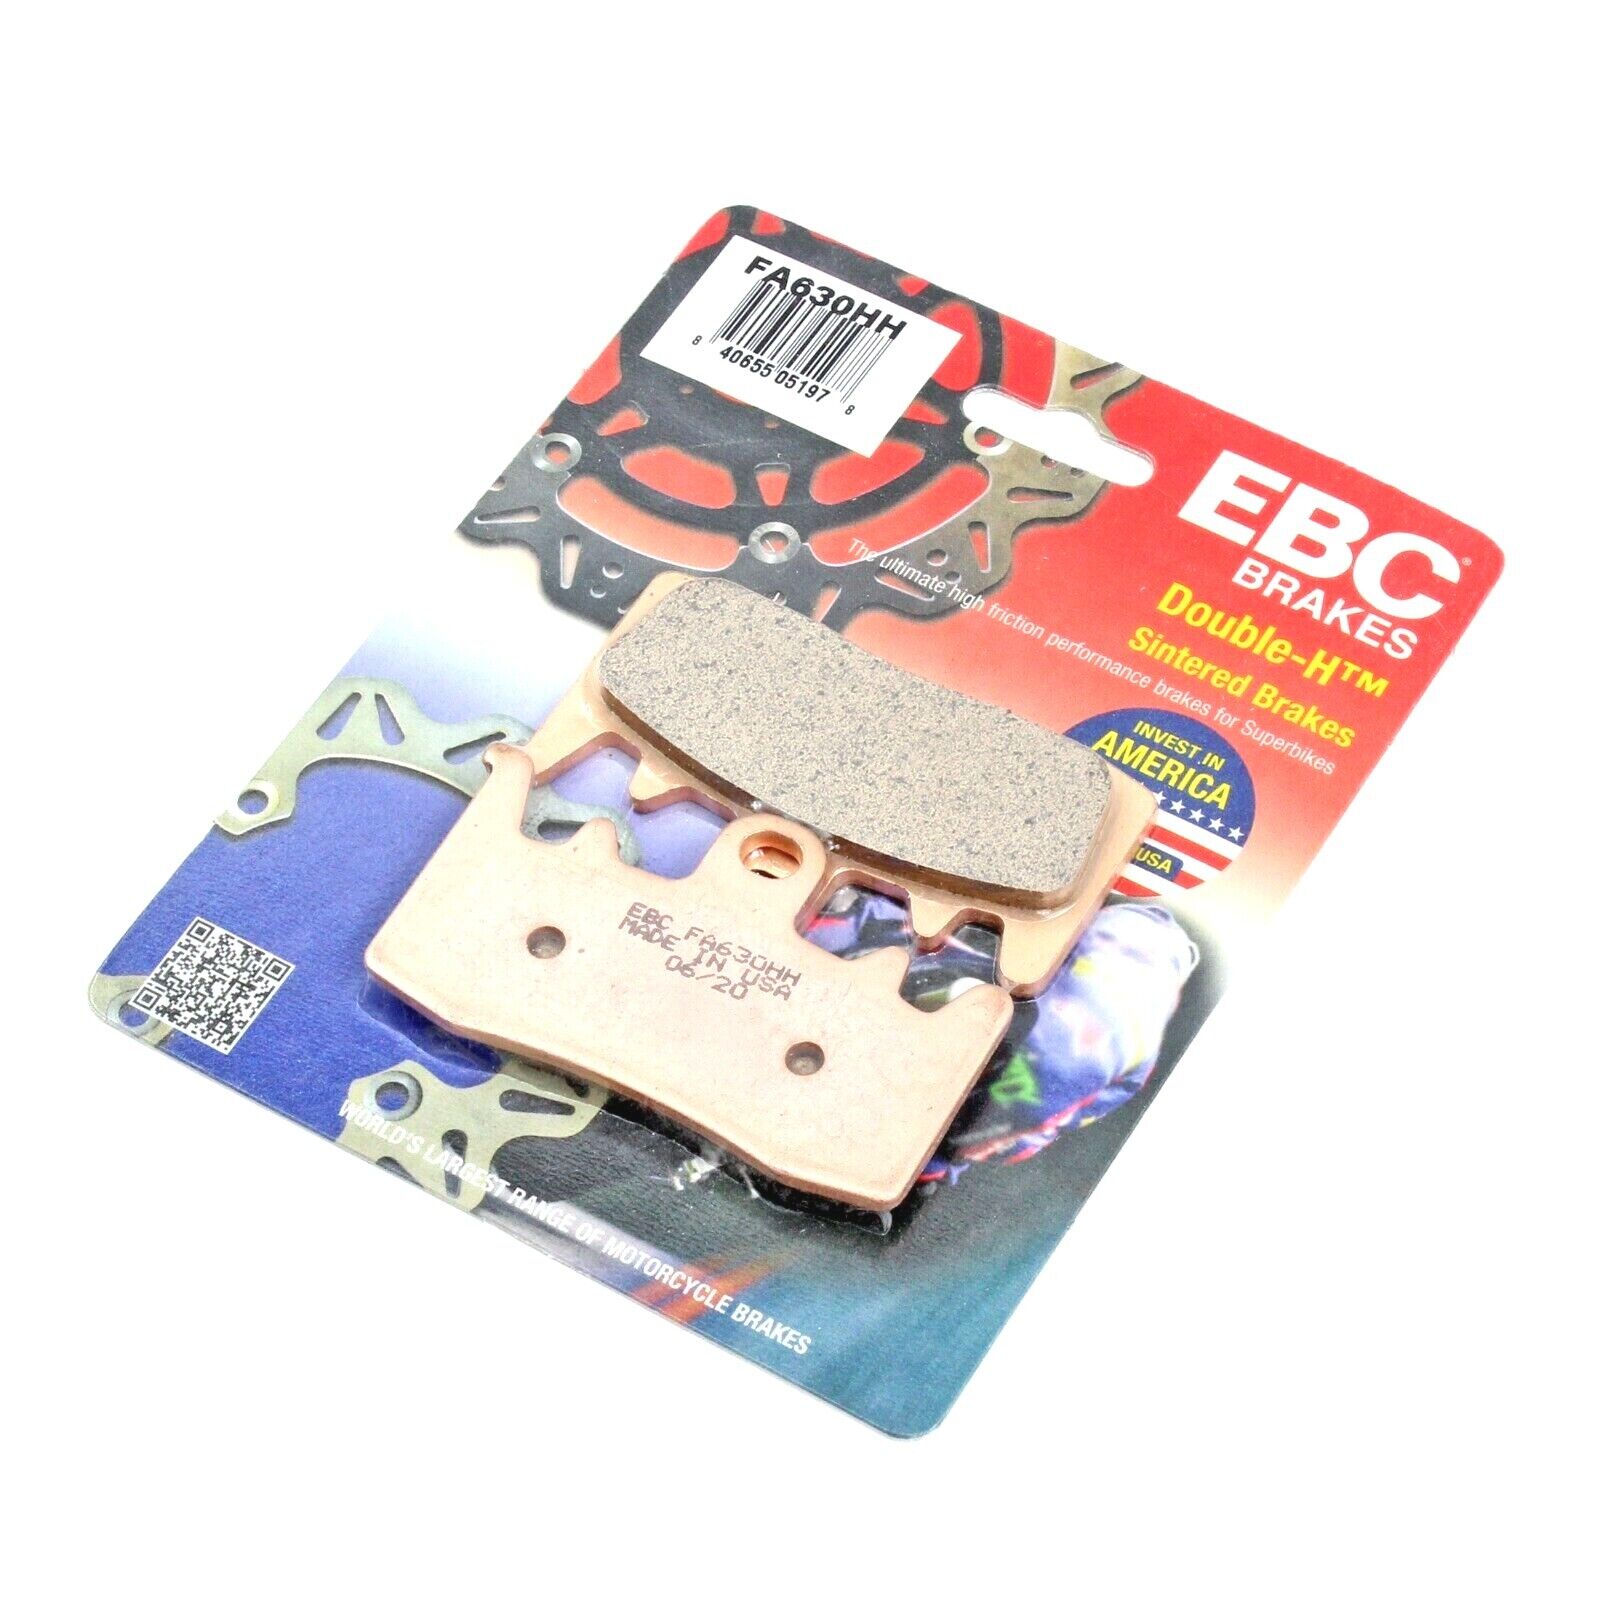 EBC FA630HH Brake Pads - HH Sintered Pads for Motorcycle - 1 Pair